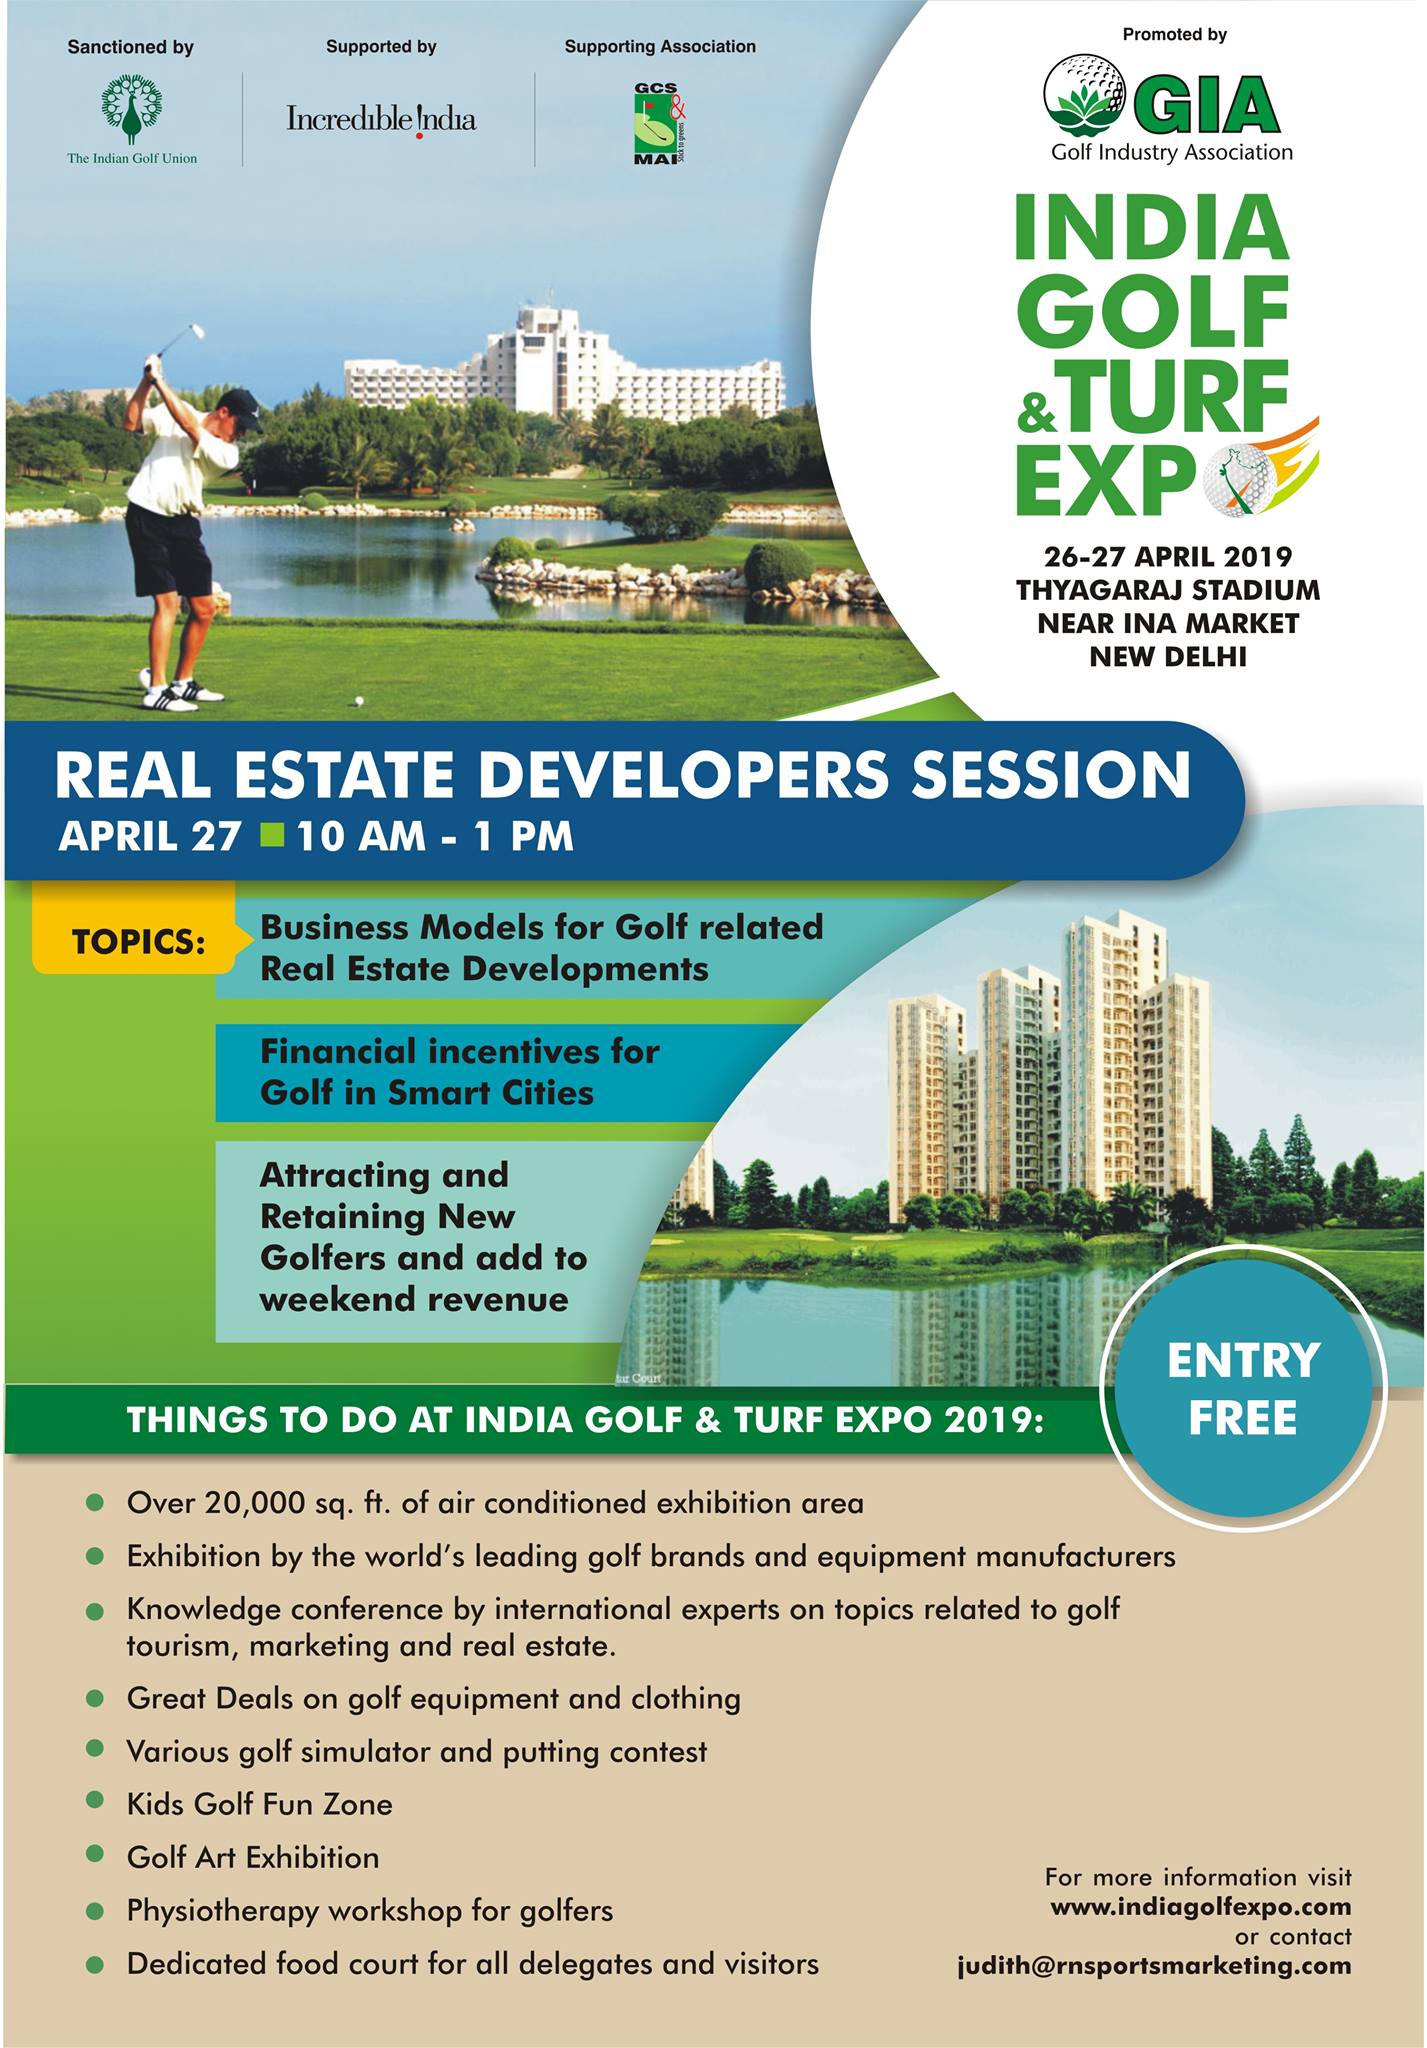 Real Estate Developers Session at India Golf & Turf Expo 2019